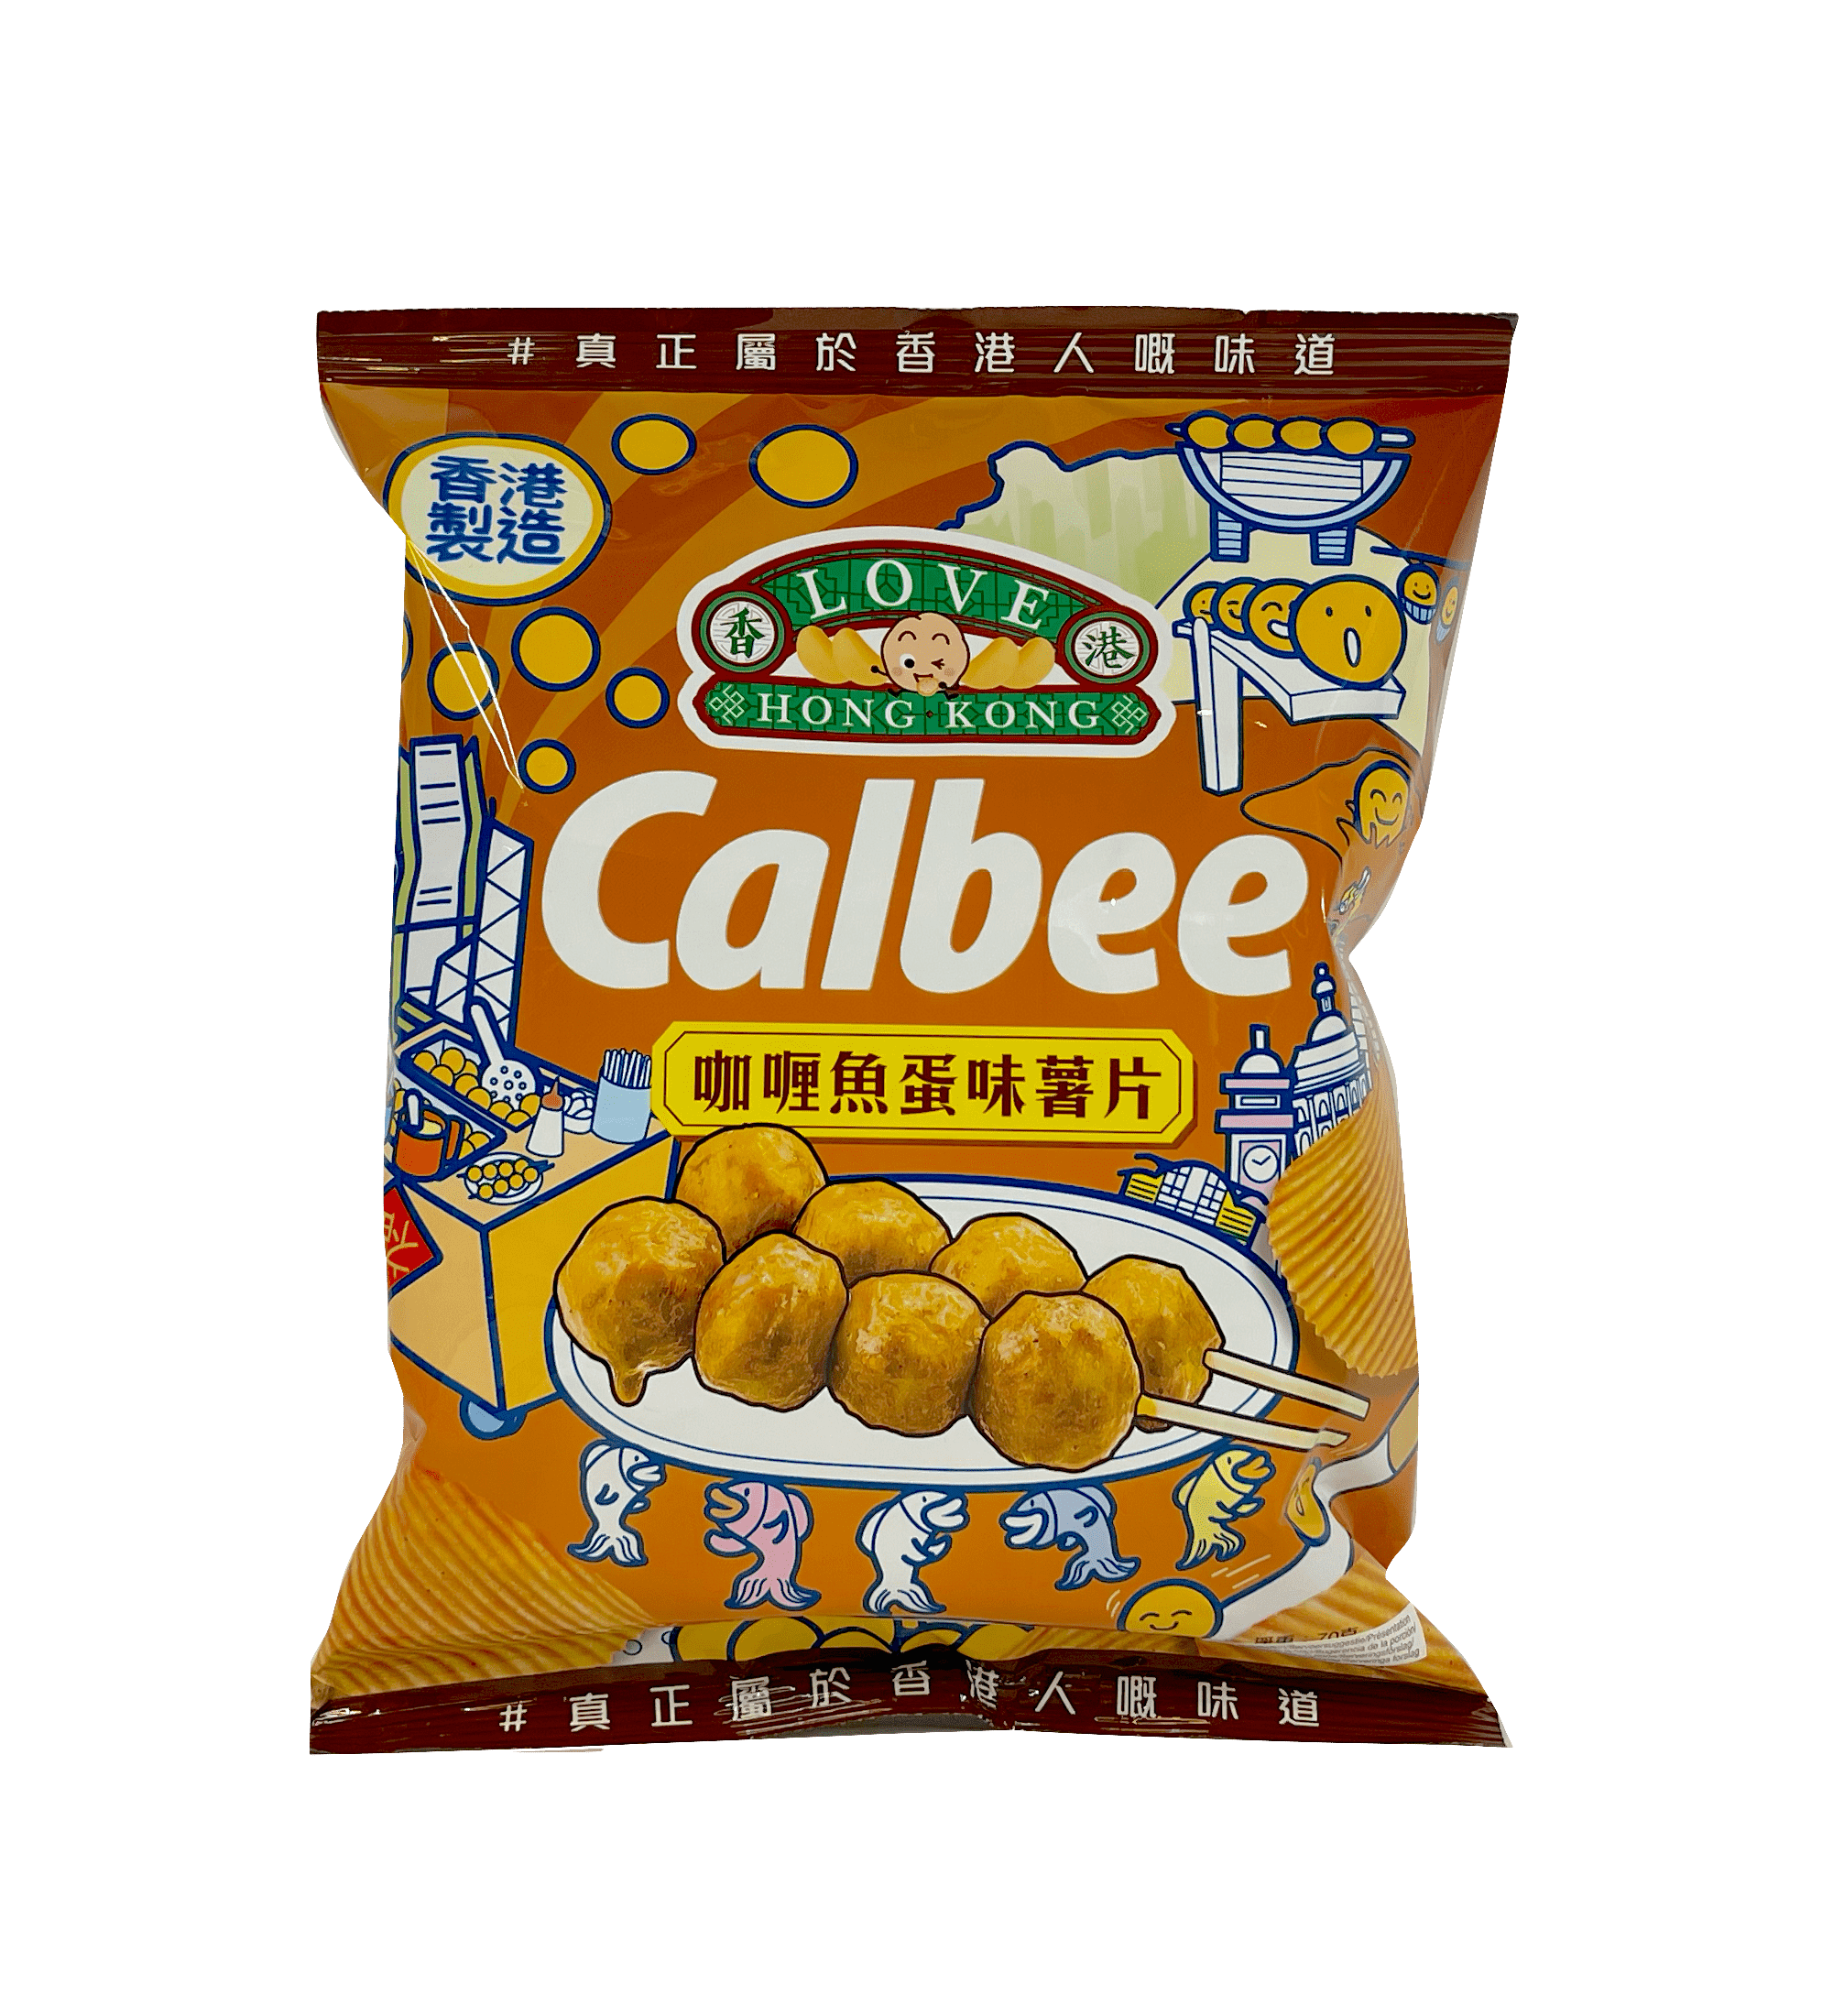 Potato Crisps With Curry Fish Balls Flavour 70g Calbee China